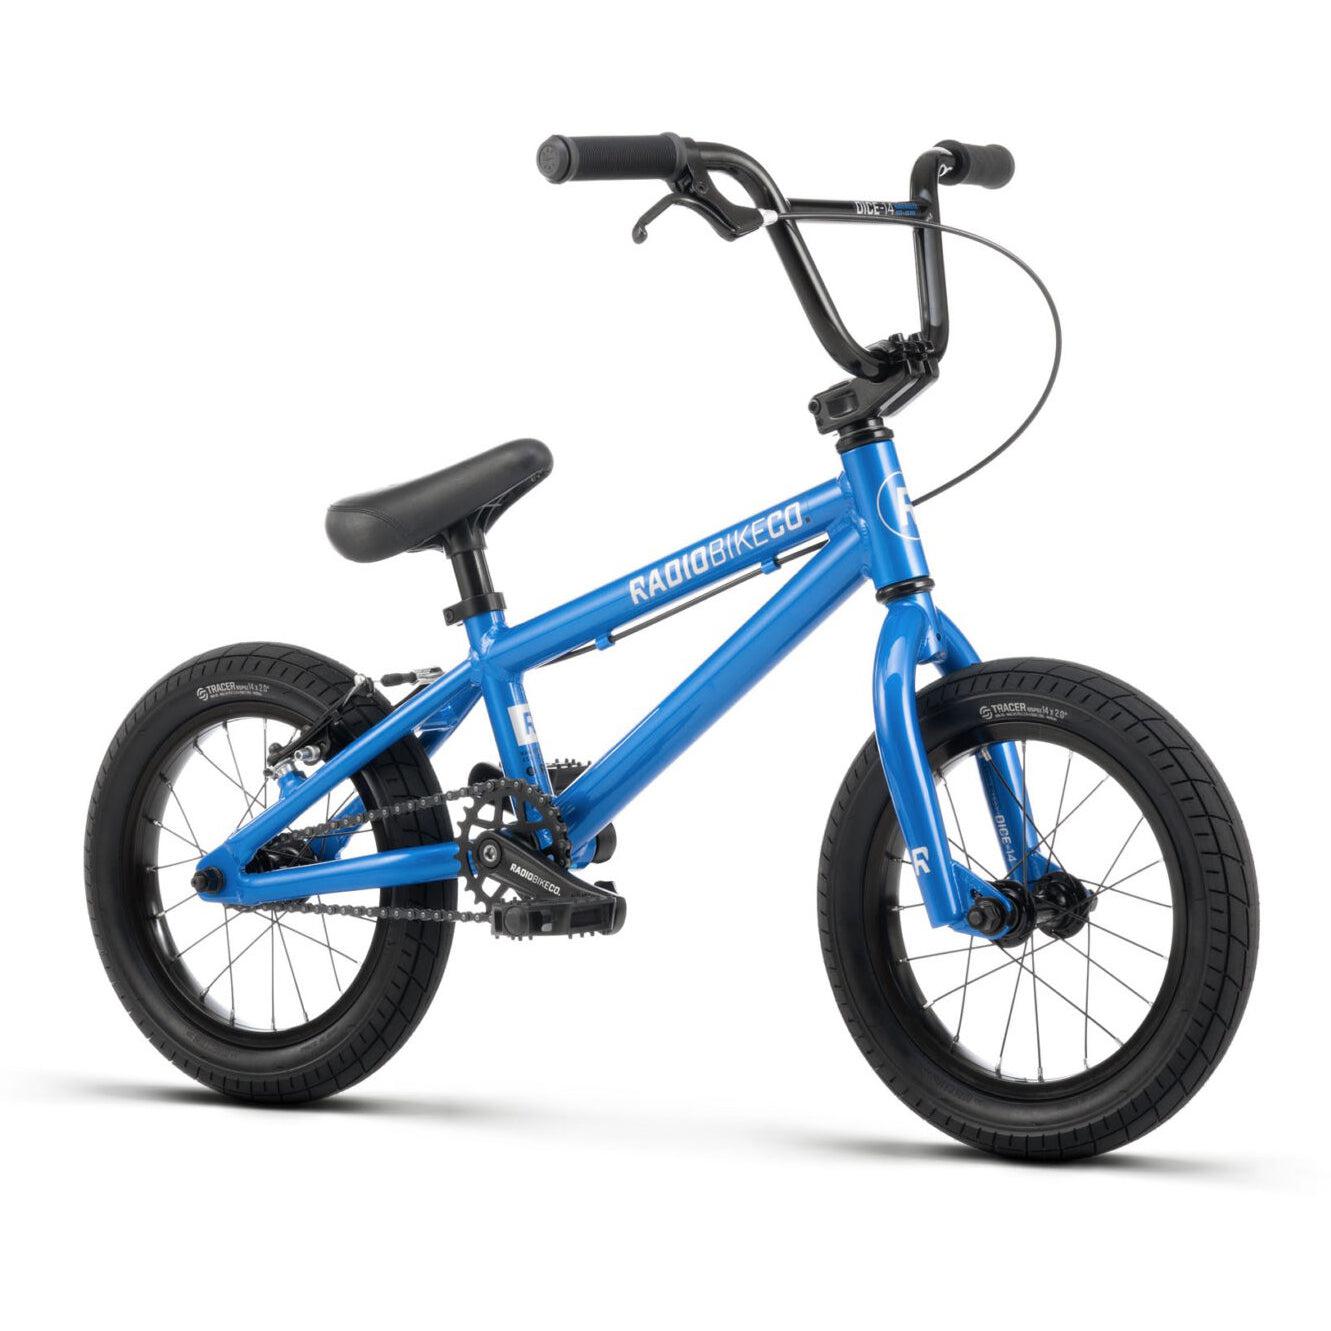 A blue children's BMX bike, the Radio Dice 18 Inch Bike, with black handlebars, seat, and Salt Tracer Tyres stands on a white background. The bike is labeled "RADIOBIKECO" on the frame.